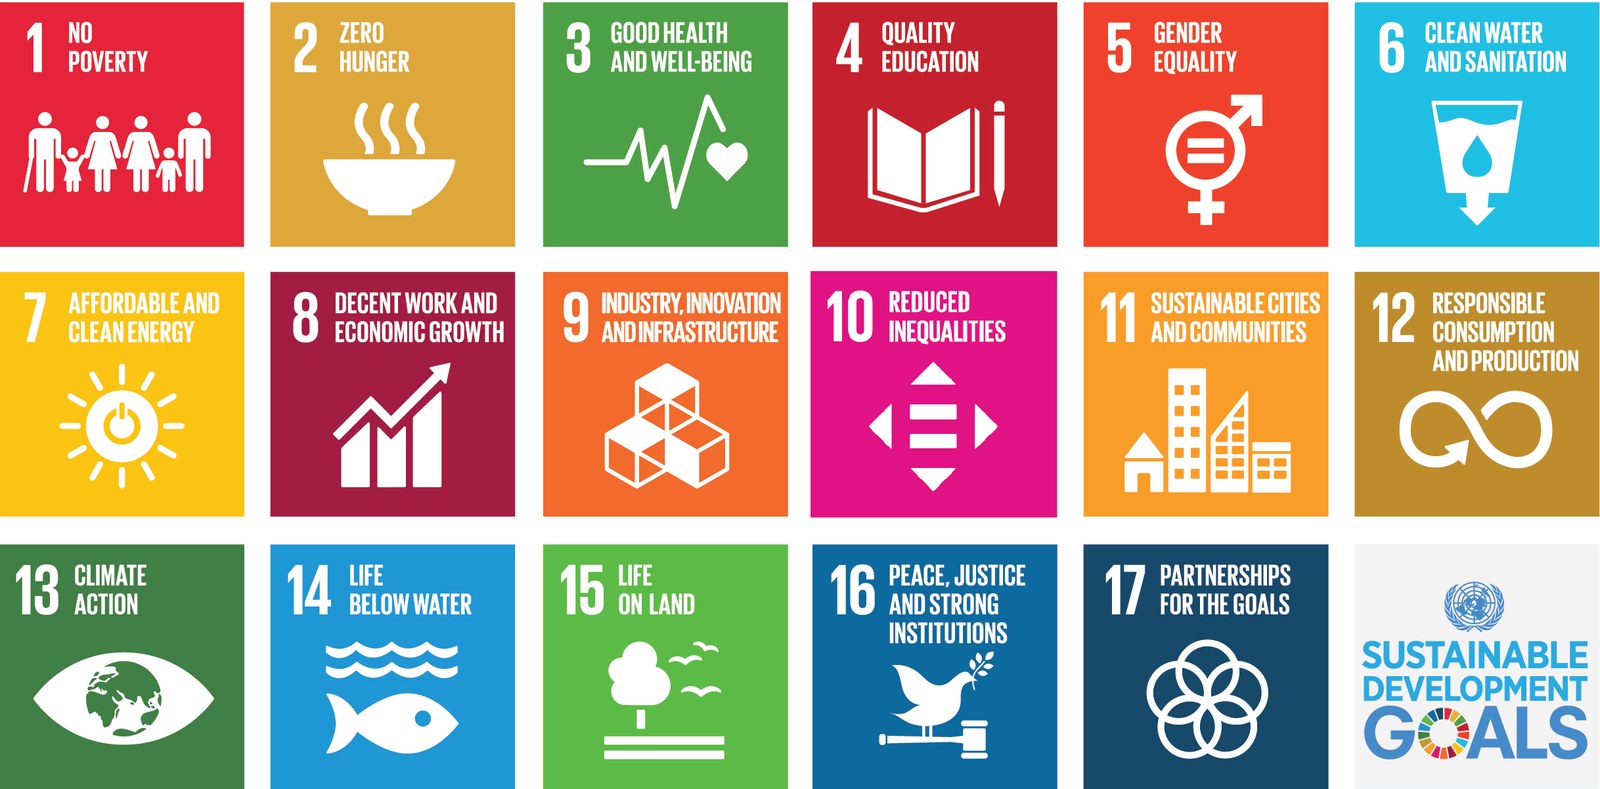 UN sustainability goals particularly relevant to DLR's work